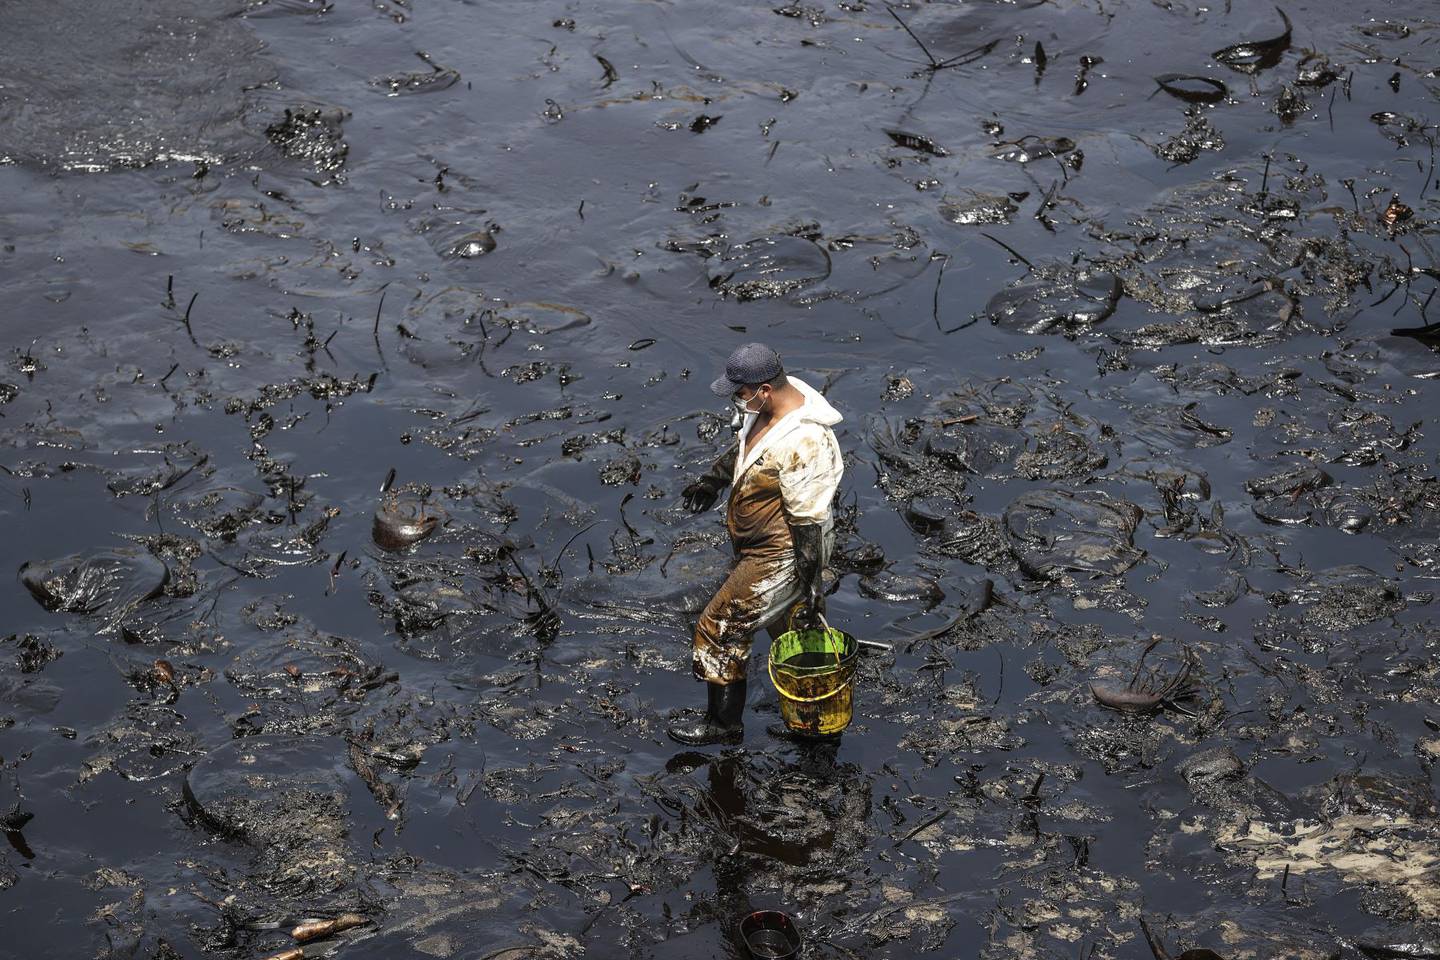 The Latin American Development Bank (CAF) and the Inter-American Development Bank (BID) will donate $450,000 to aid Peru in the cleanup of the oil spill.